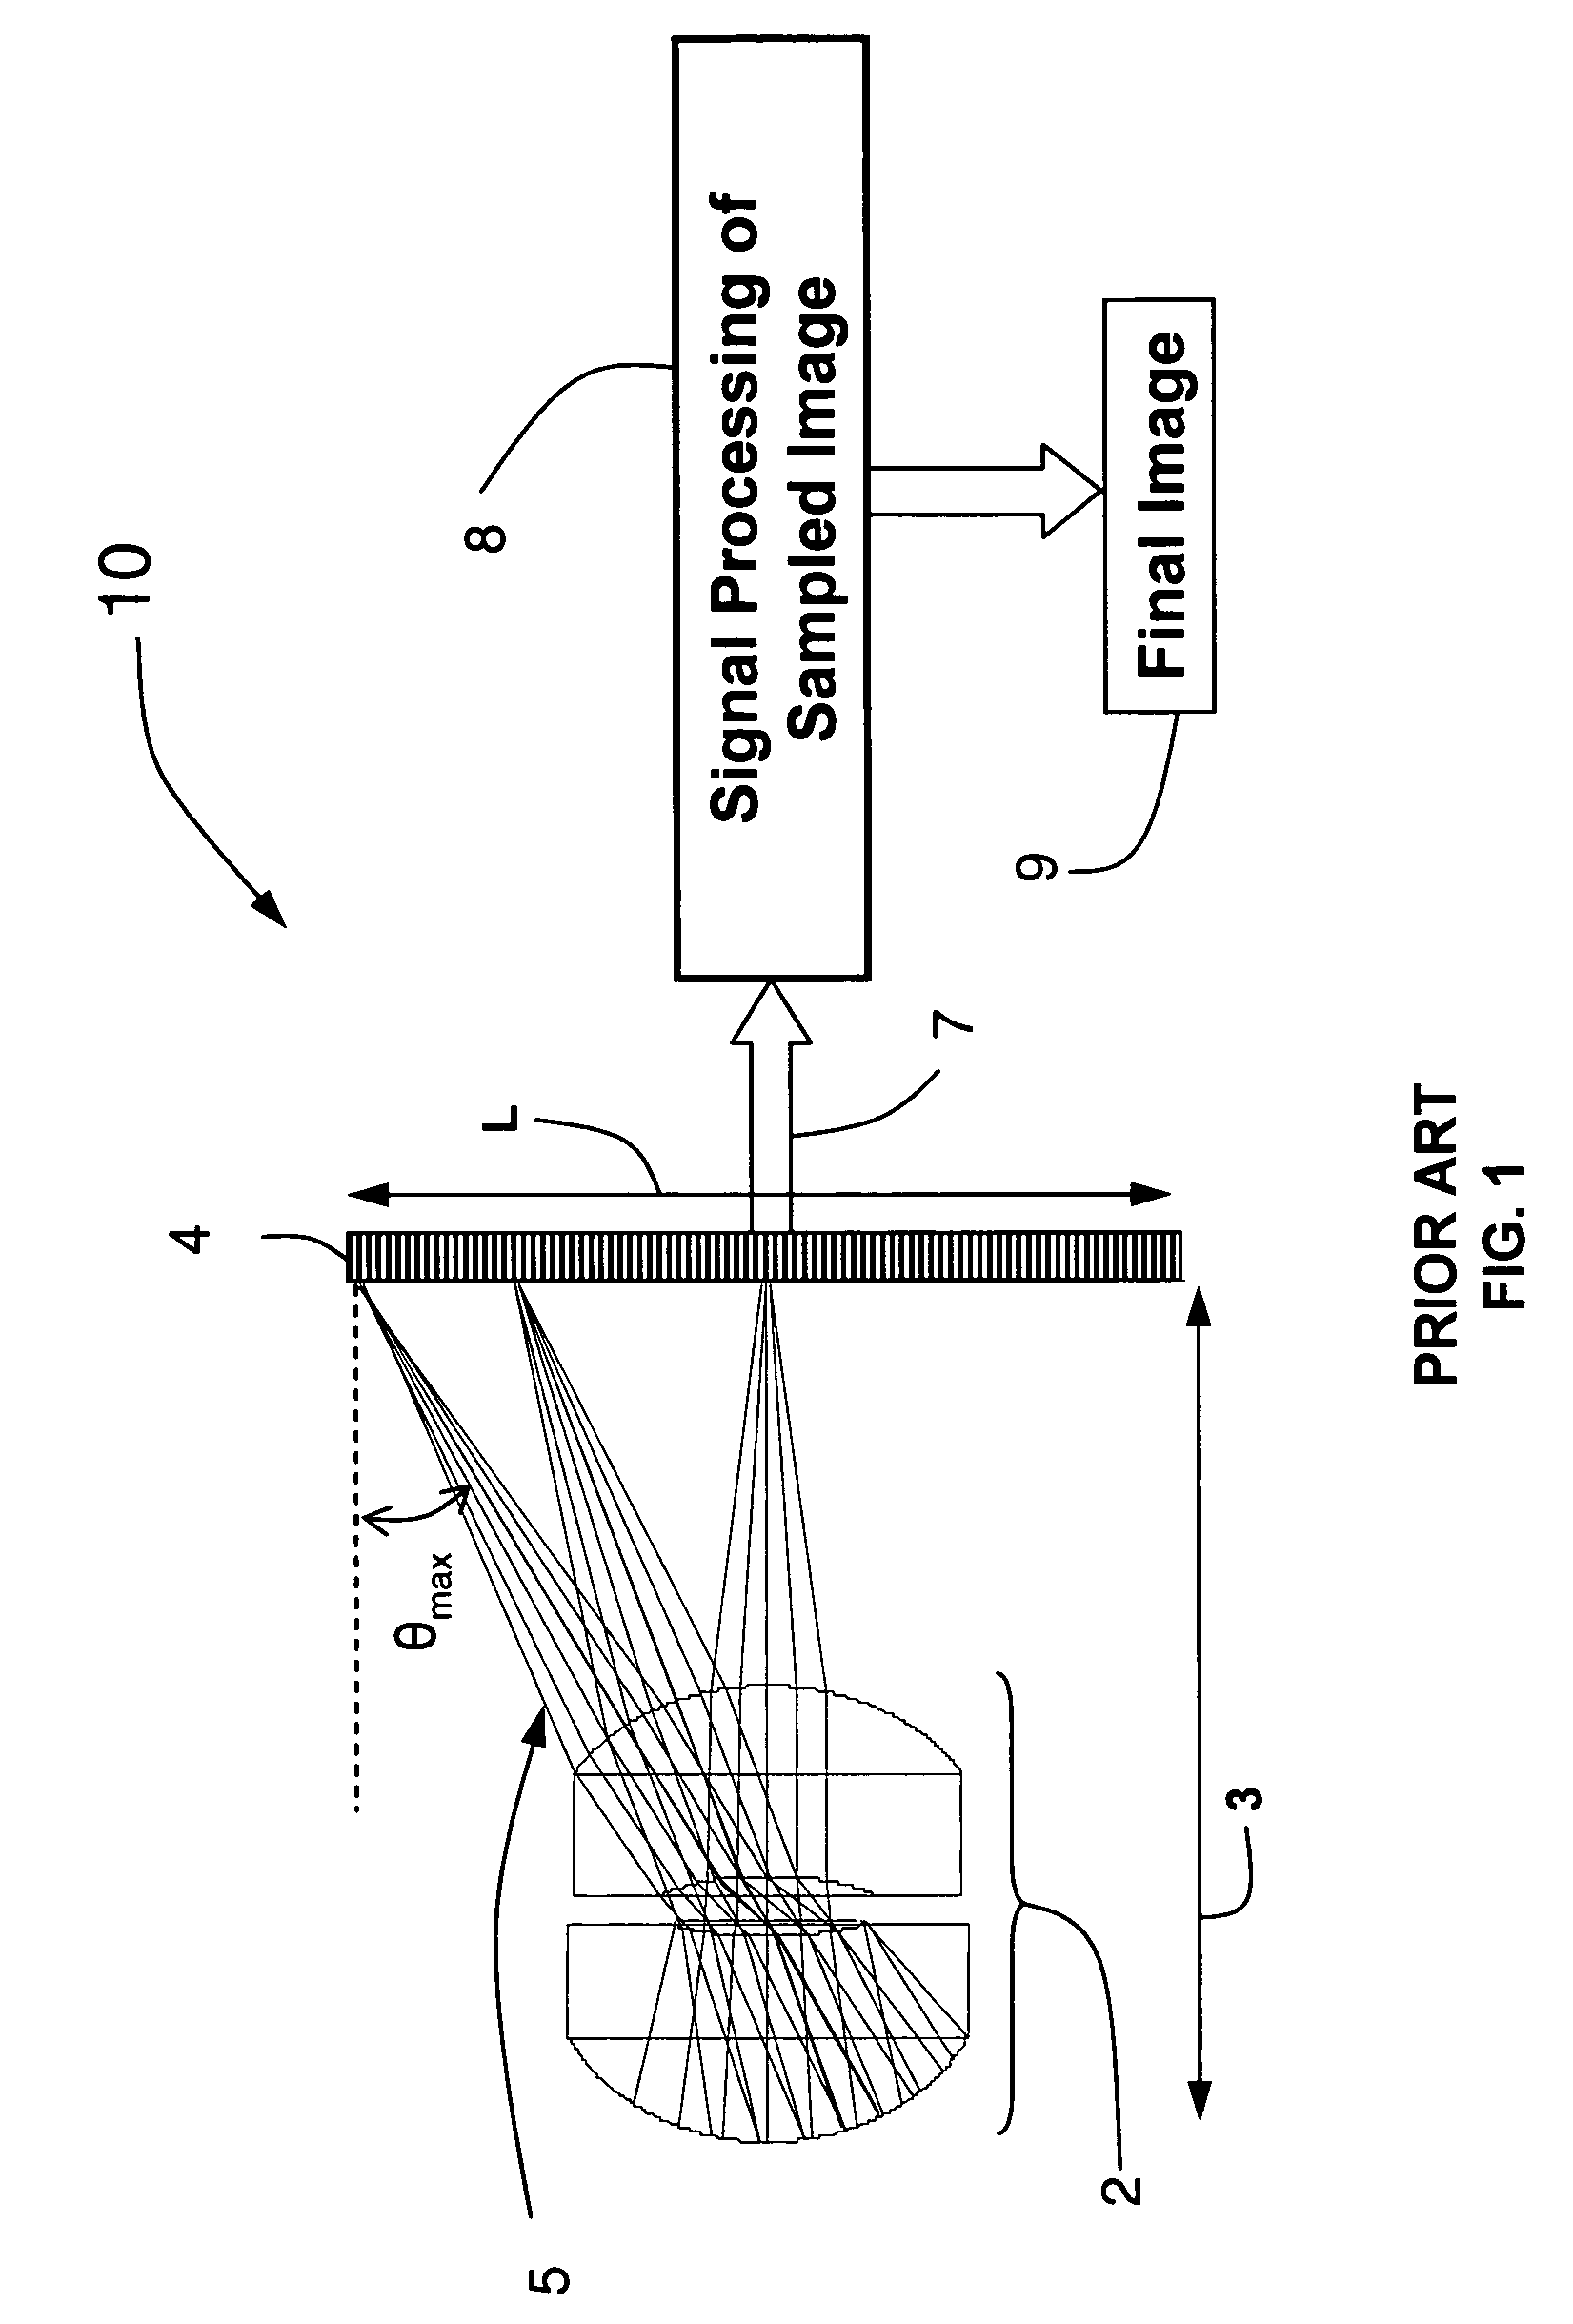 Low height imaging system and associated methods